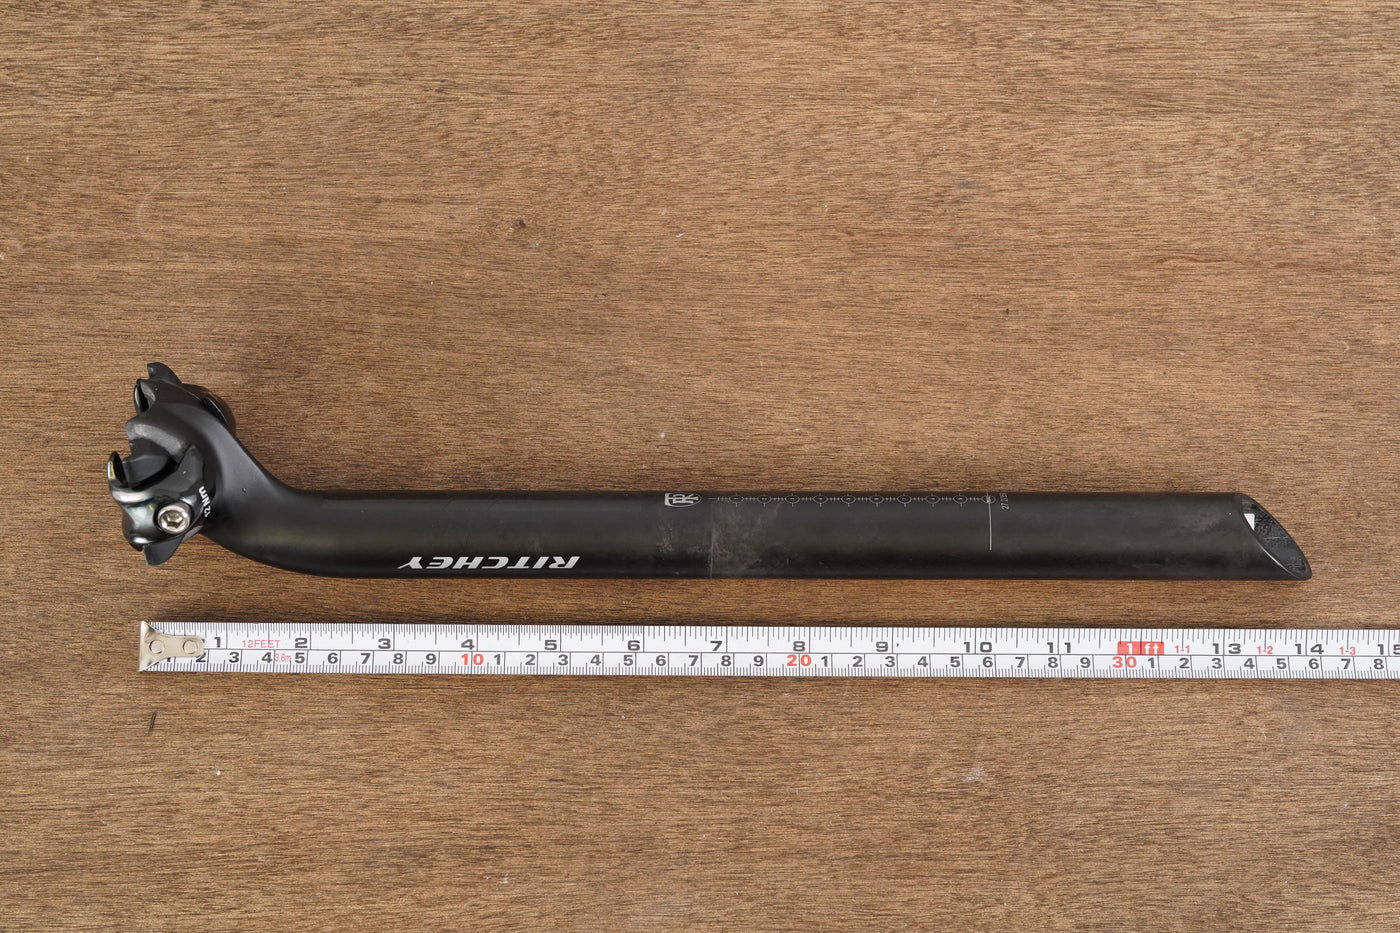 27.2mm Ritchey WCS Carbon Setback Road Seatpost 183g